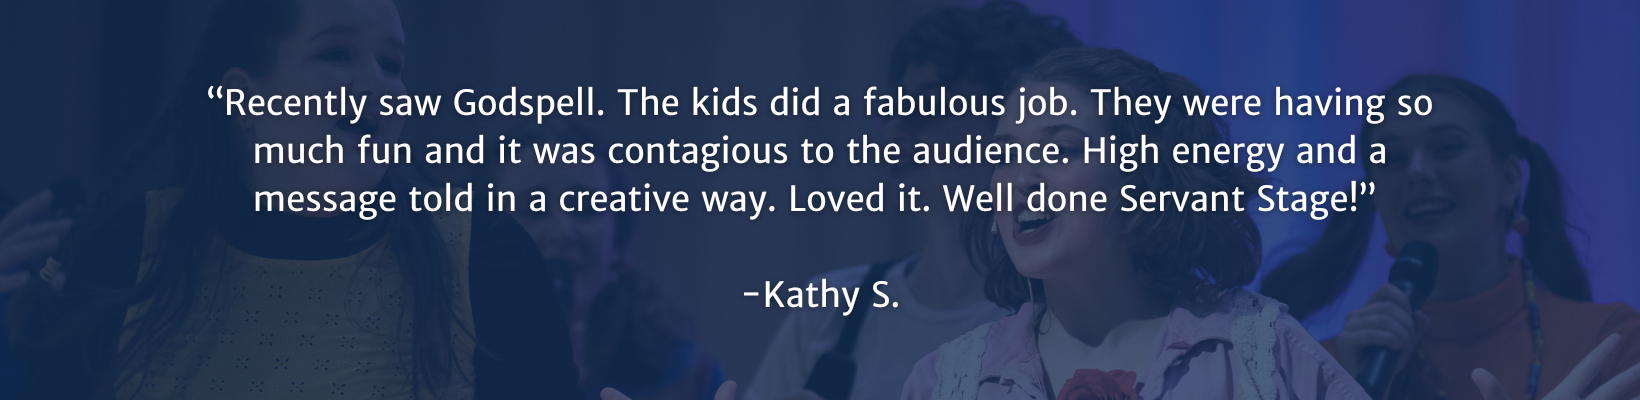 Servant Stage Review_Kathy S.